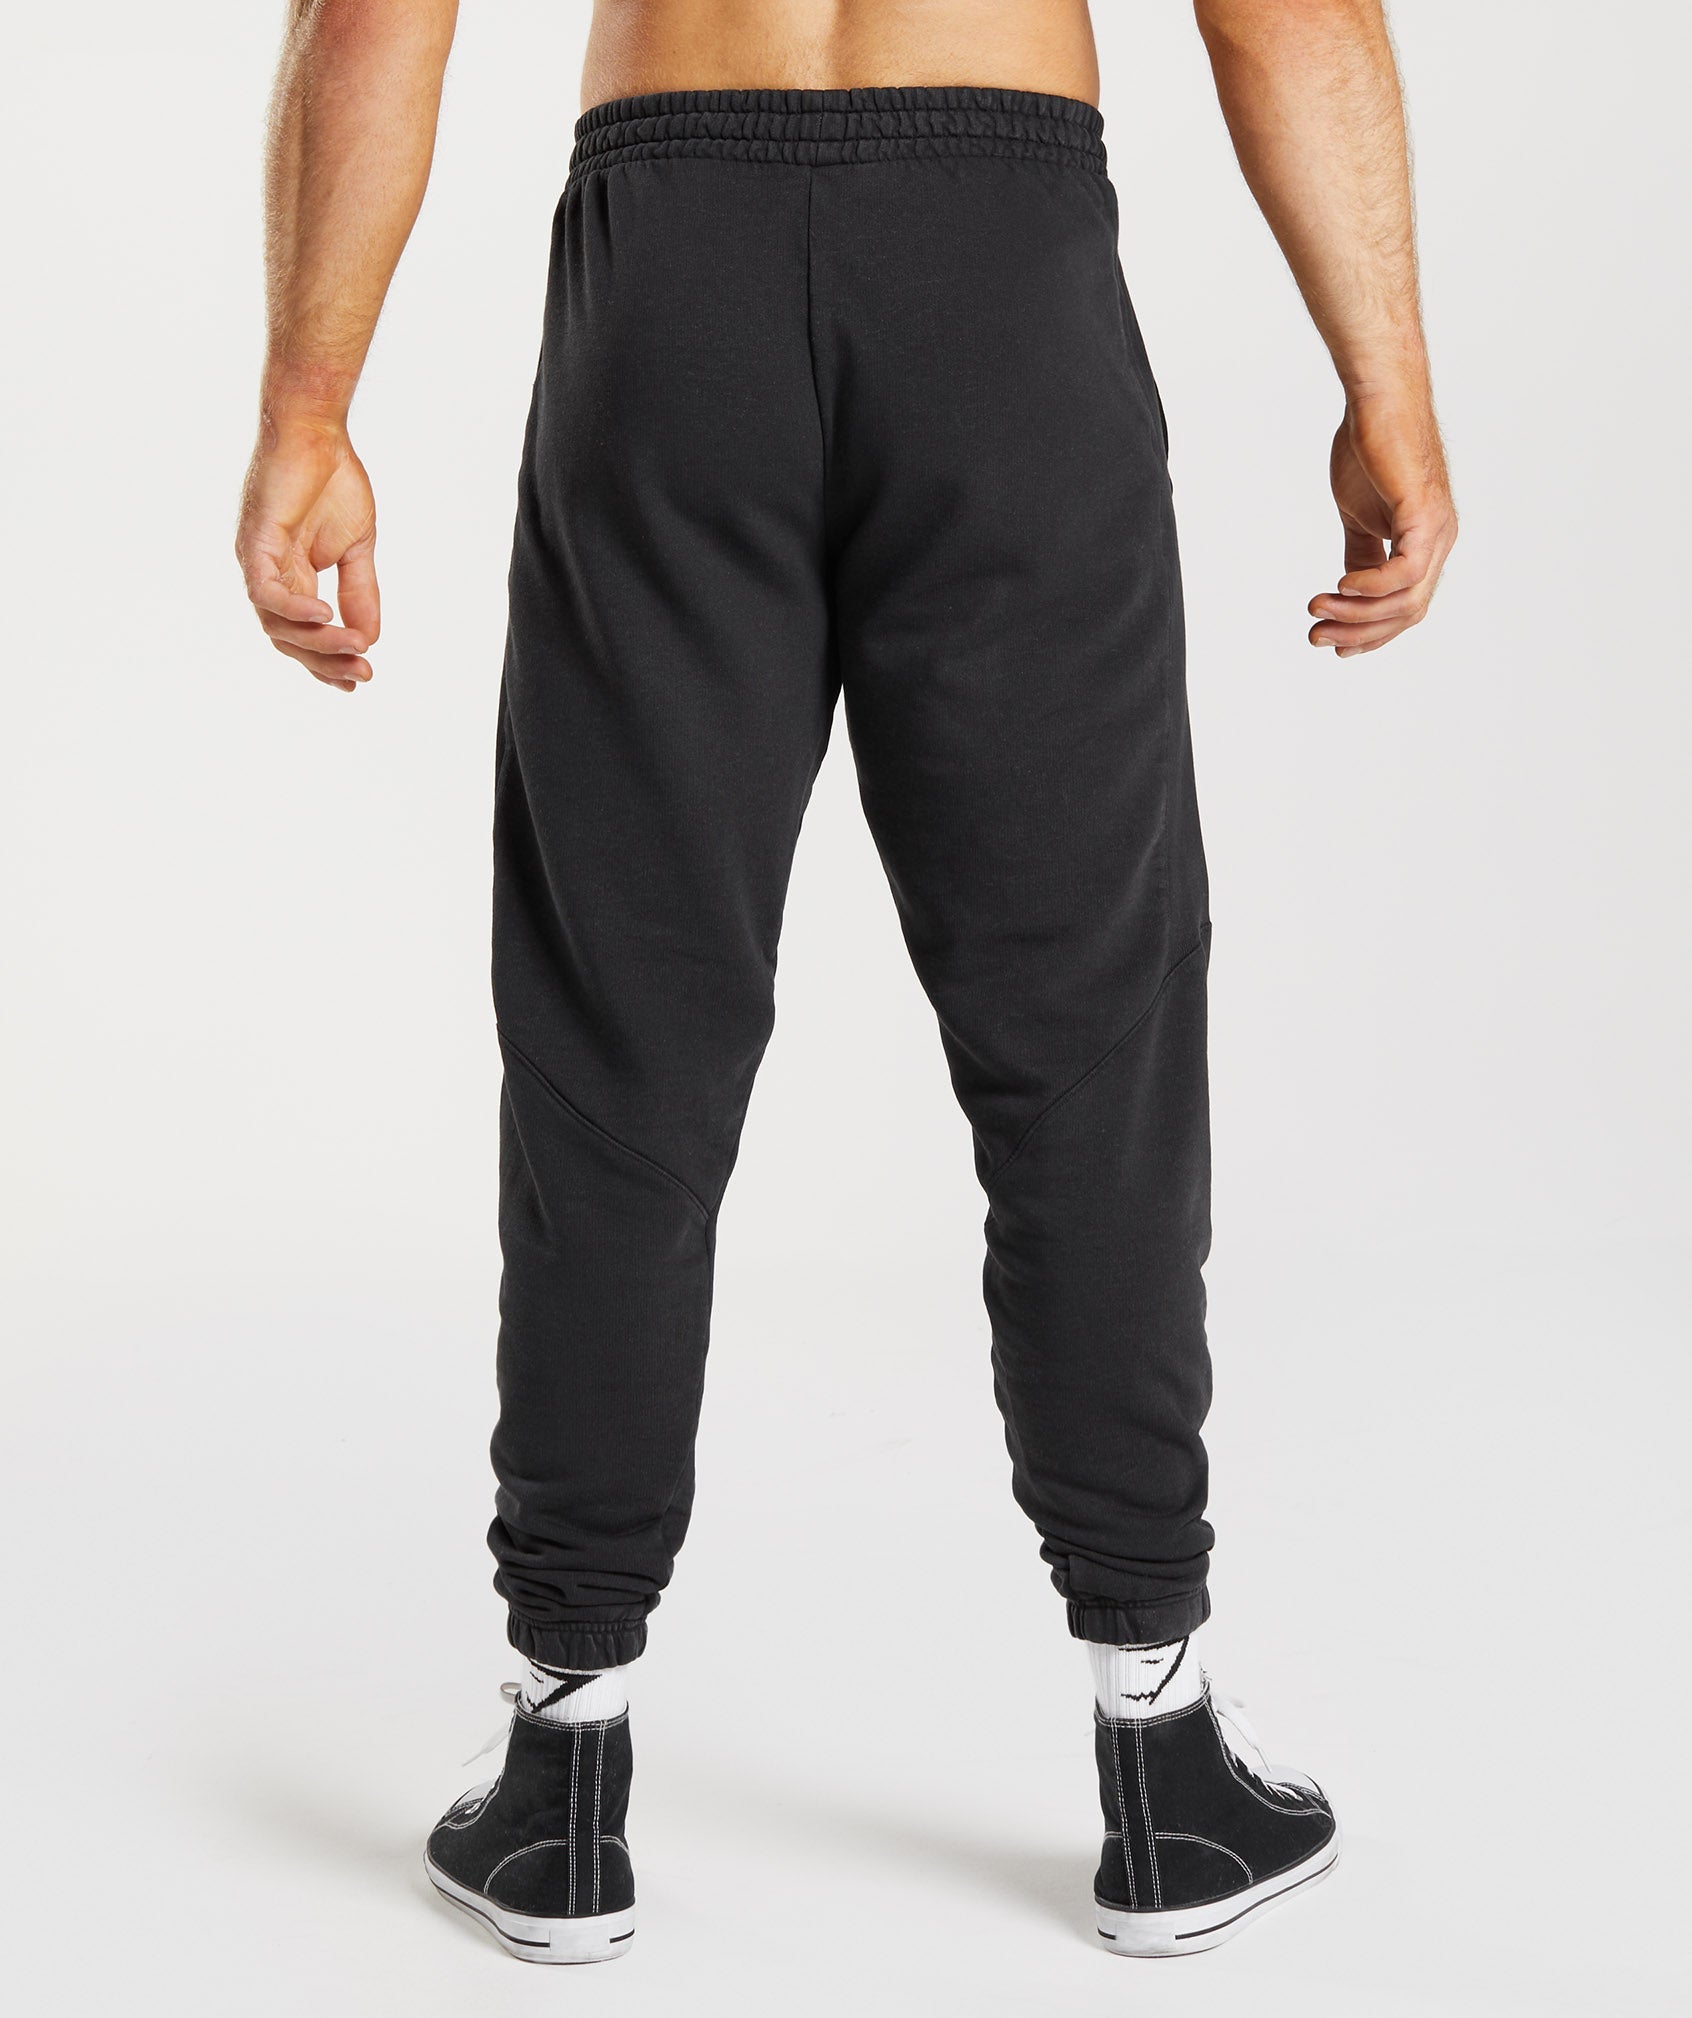 Gymshark Rest Day Knit Joggers - Pitch Grey